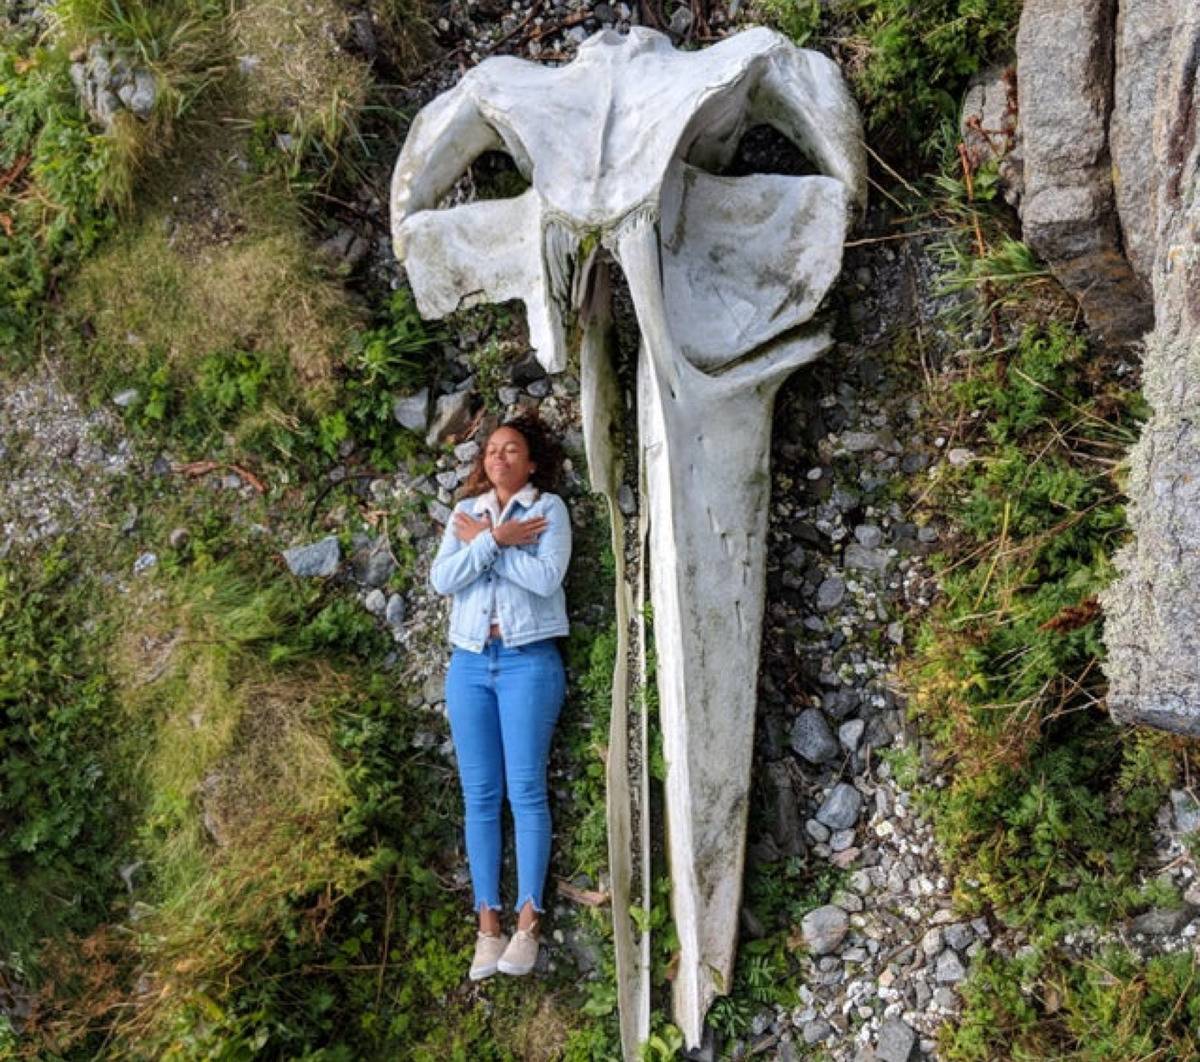 <p>Here's a picture of a woman laying down next to a whale skull, and it's kind of terrifying. </p> <p>But, wait, what if that's a bird skull and that lady is just a VERY, VERY tiny person? Food for thought. </p>